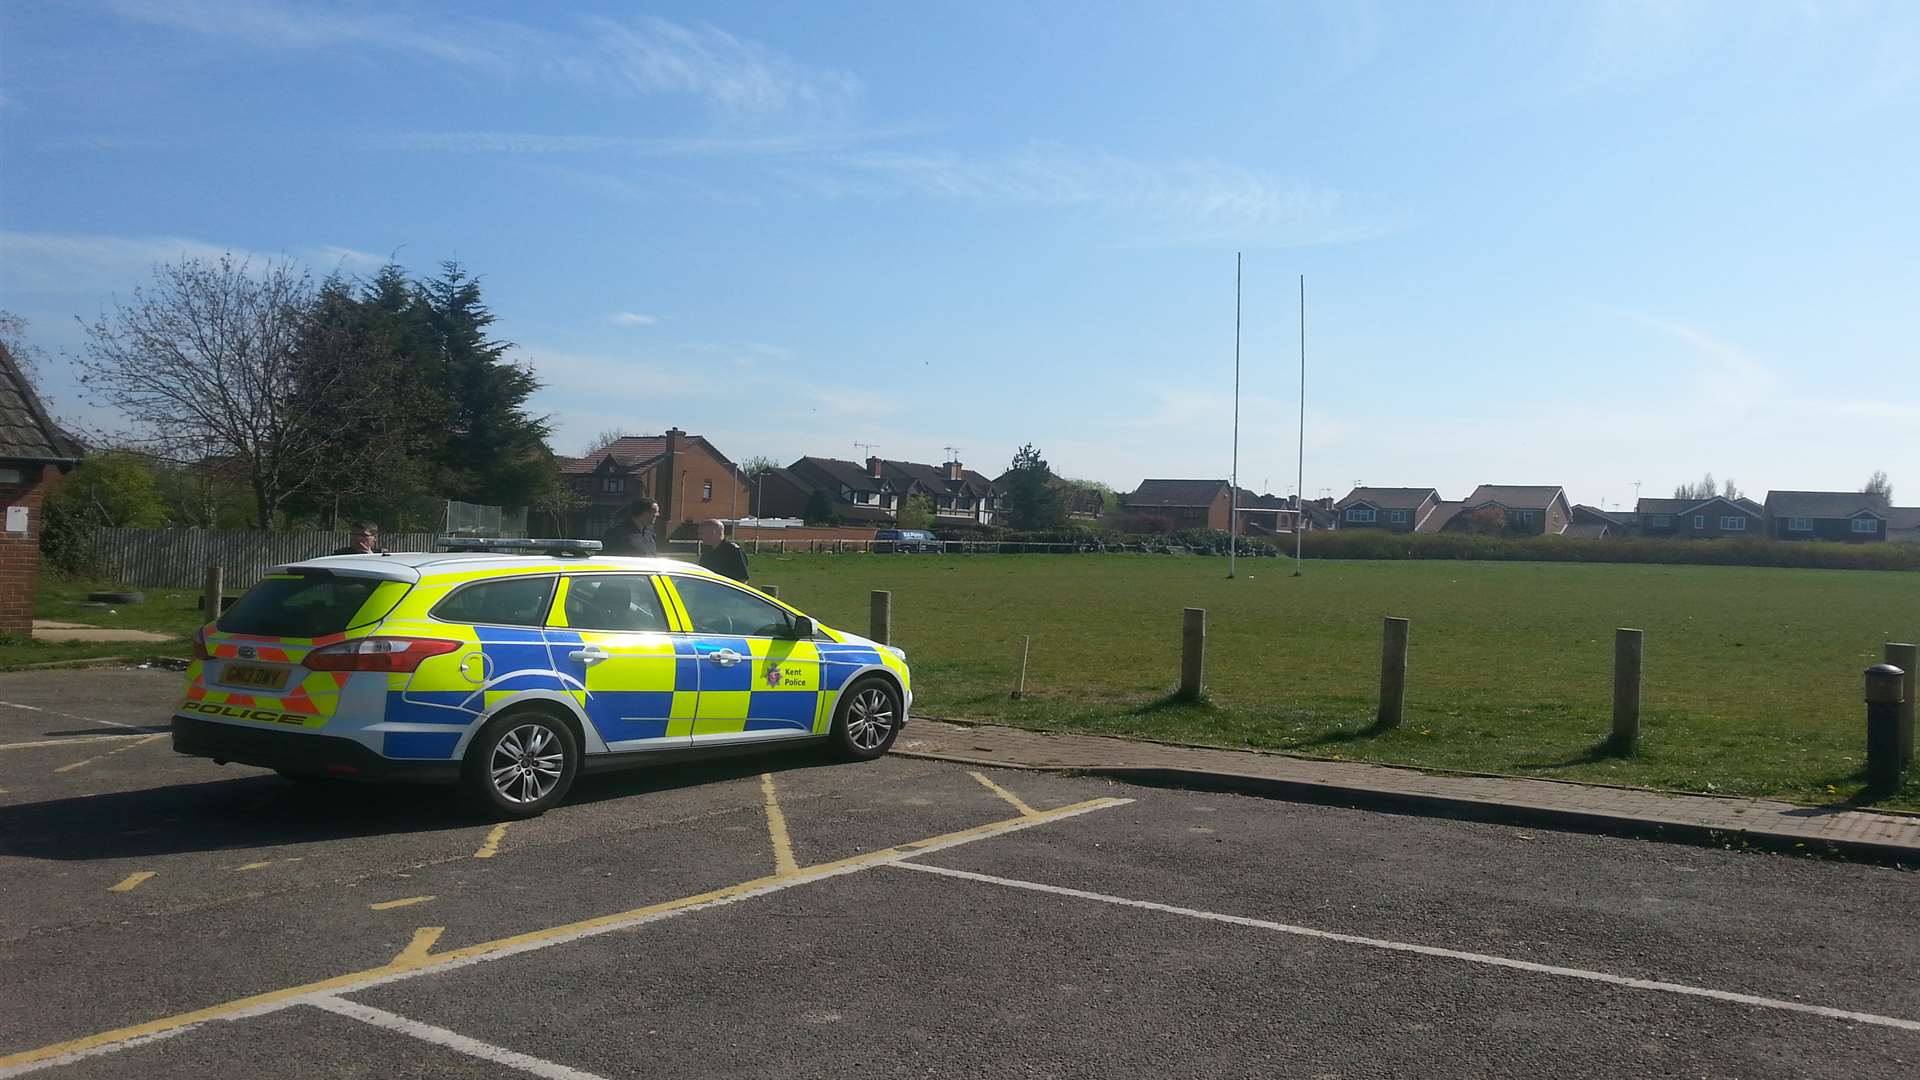 Police were seen in Whitstable Rugby Club's car park